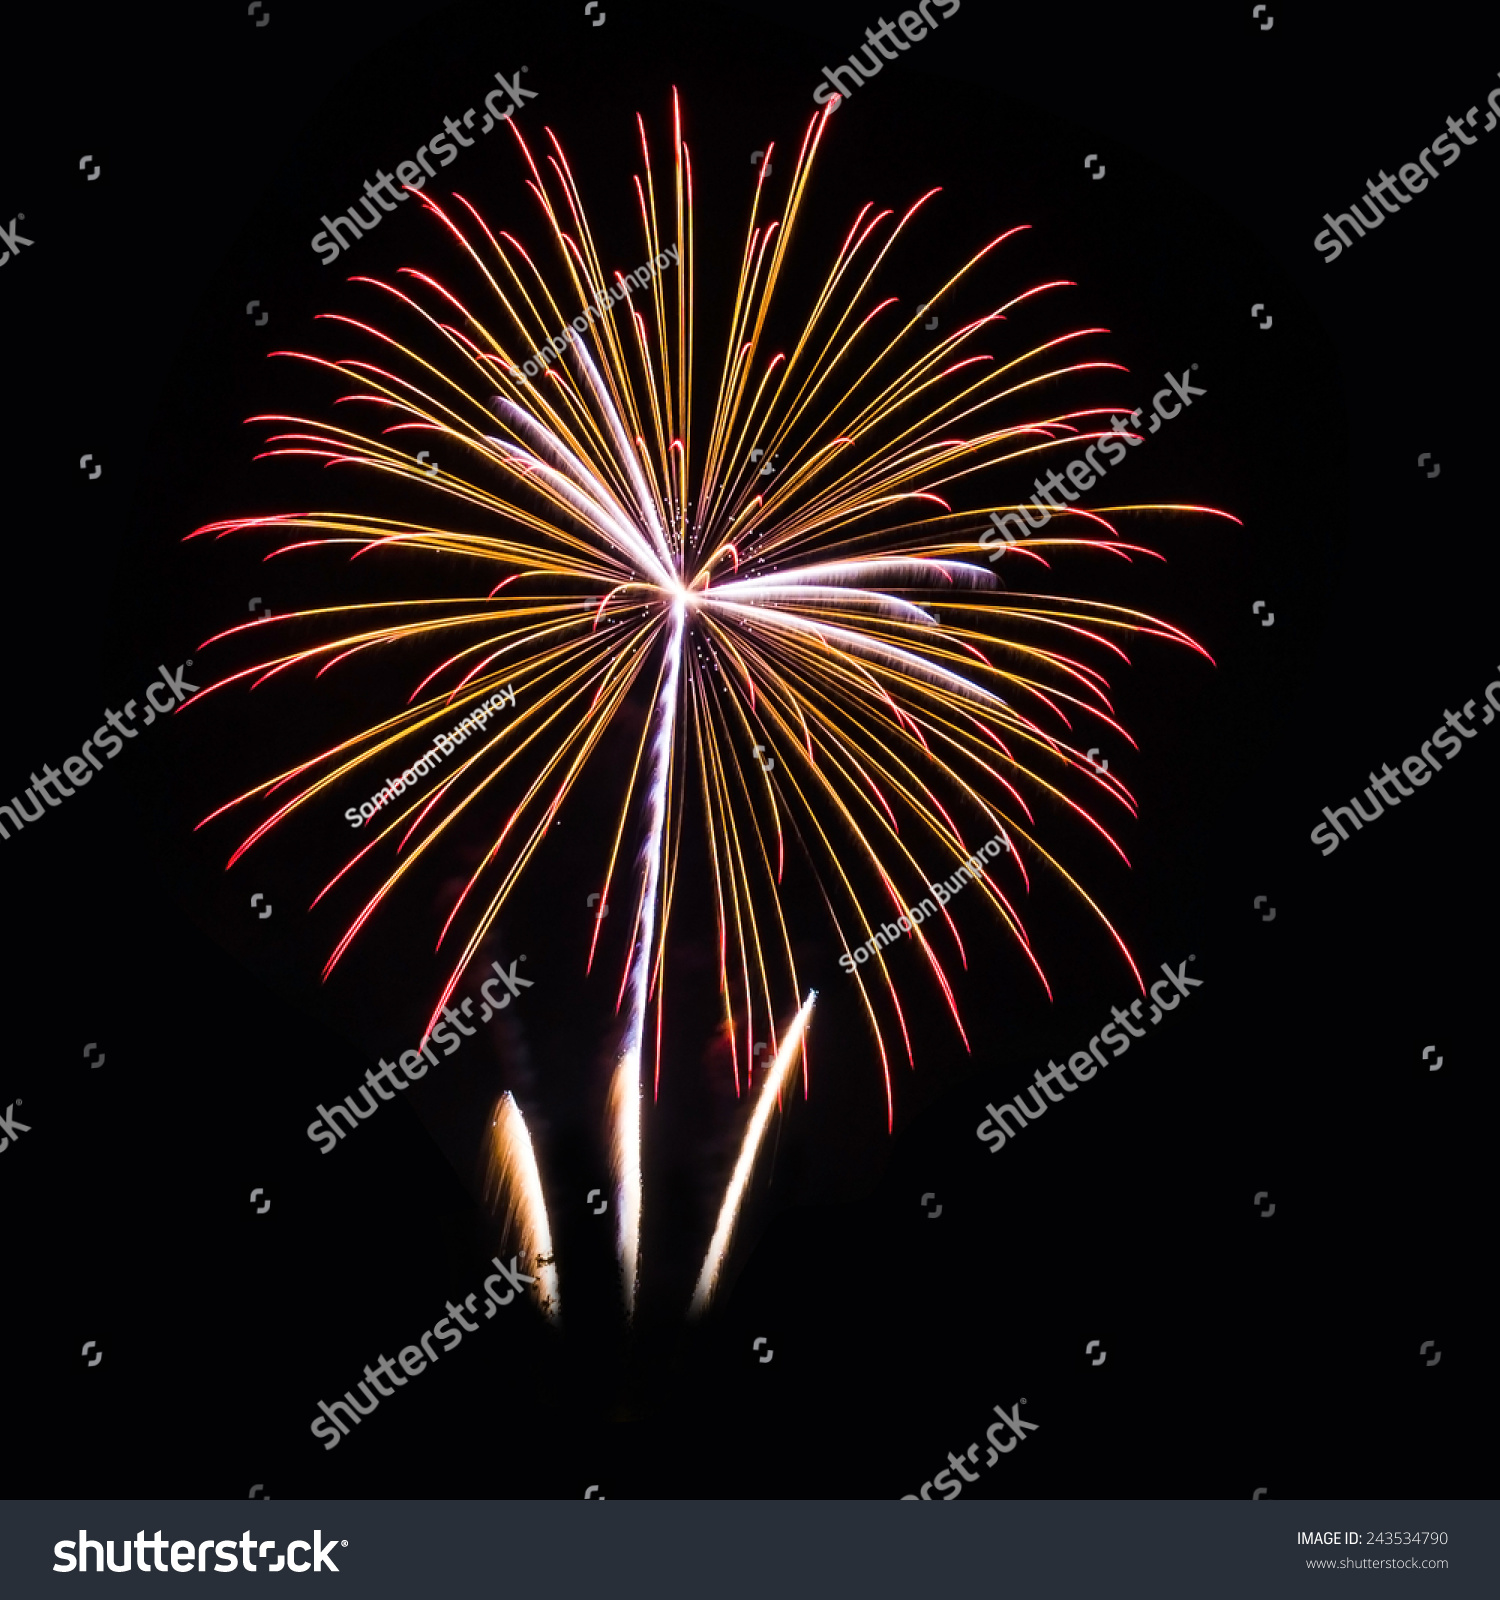 Large Fireworks Display All Types Celebrations Stock Photo (Royalty ...